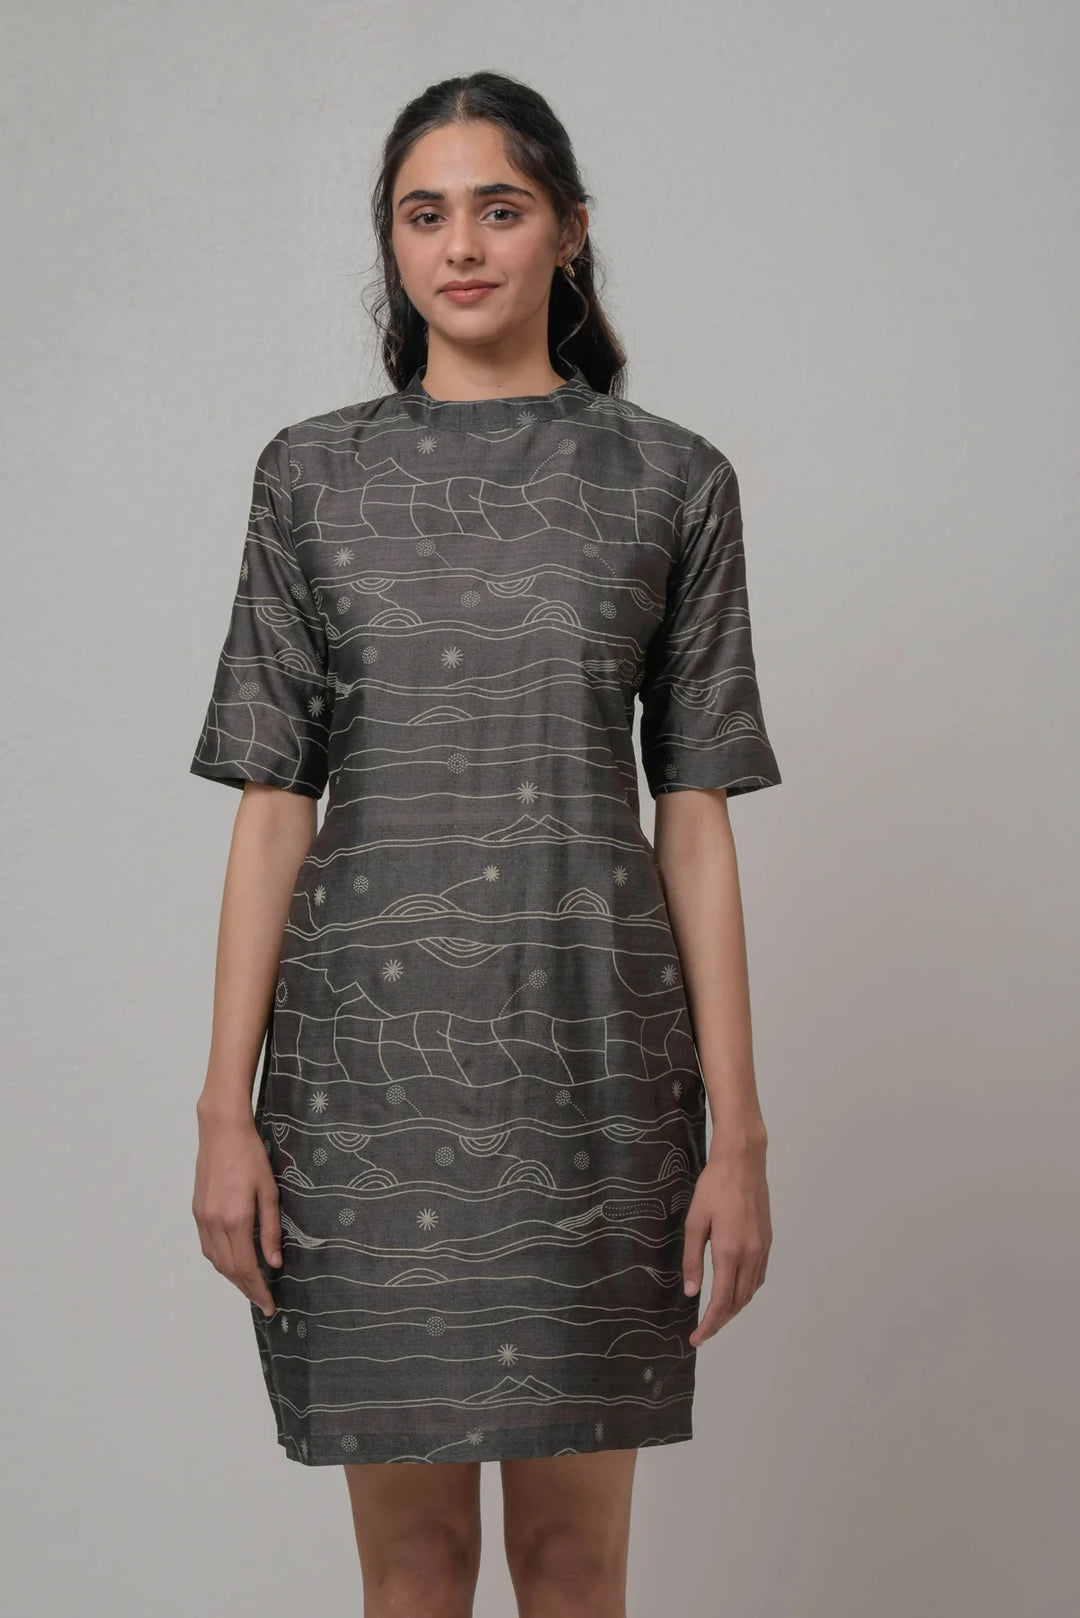 Handwoven Silk Dress with Abstract Print | Ellone Handwoven Cotton Dress - Gray